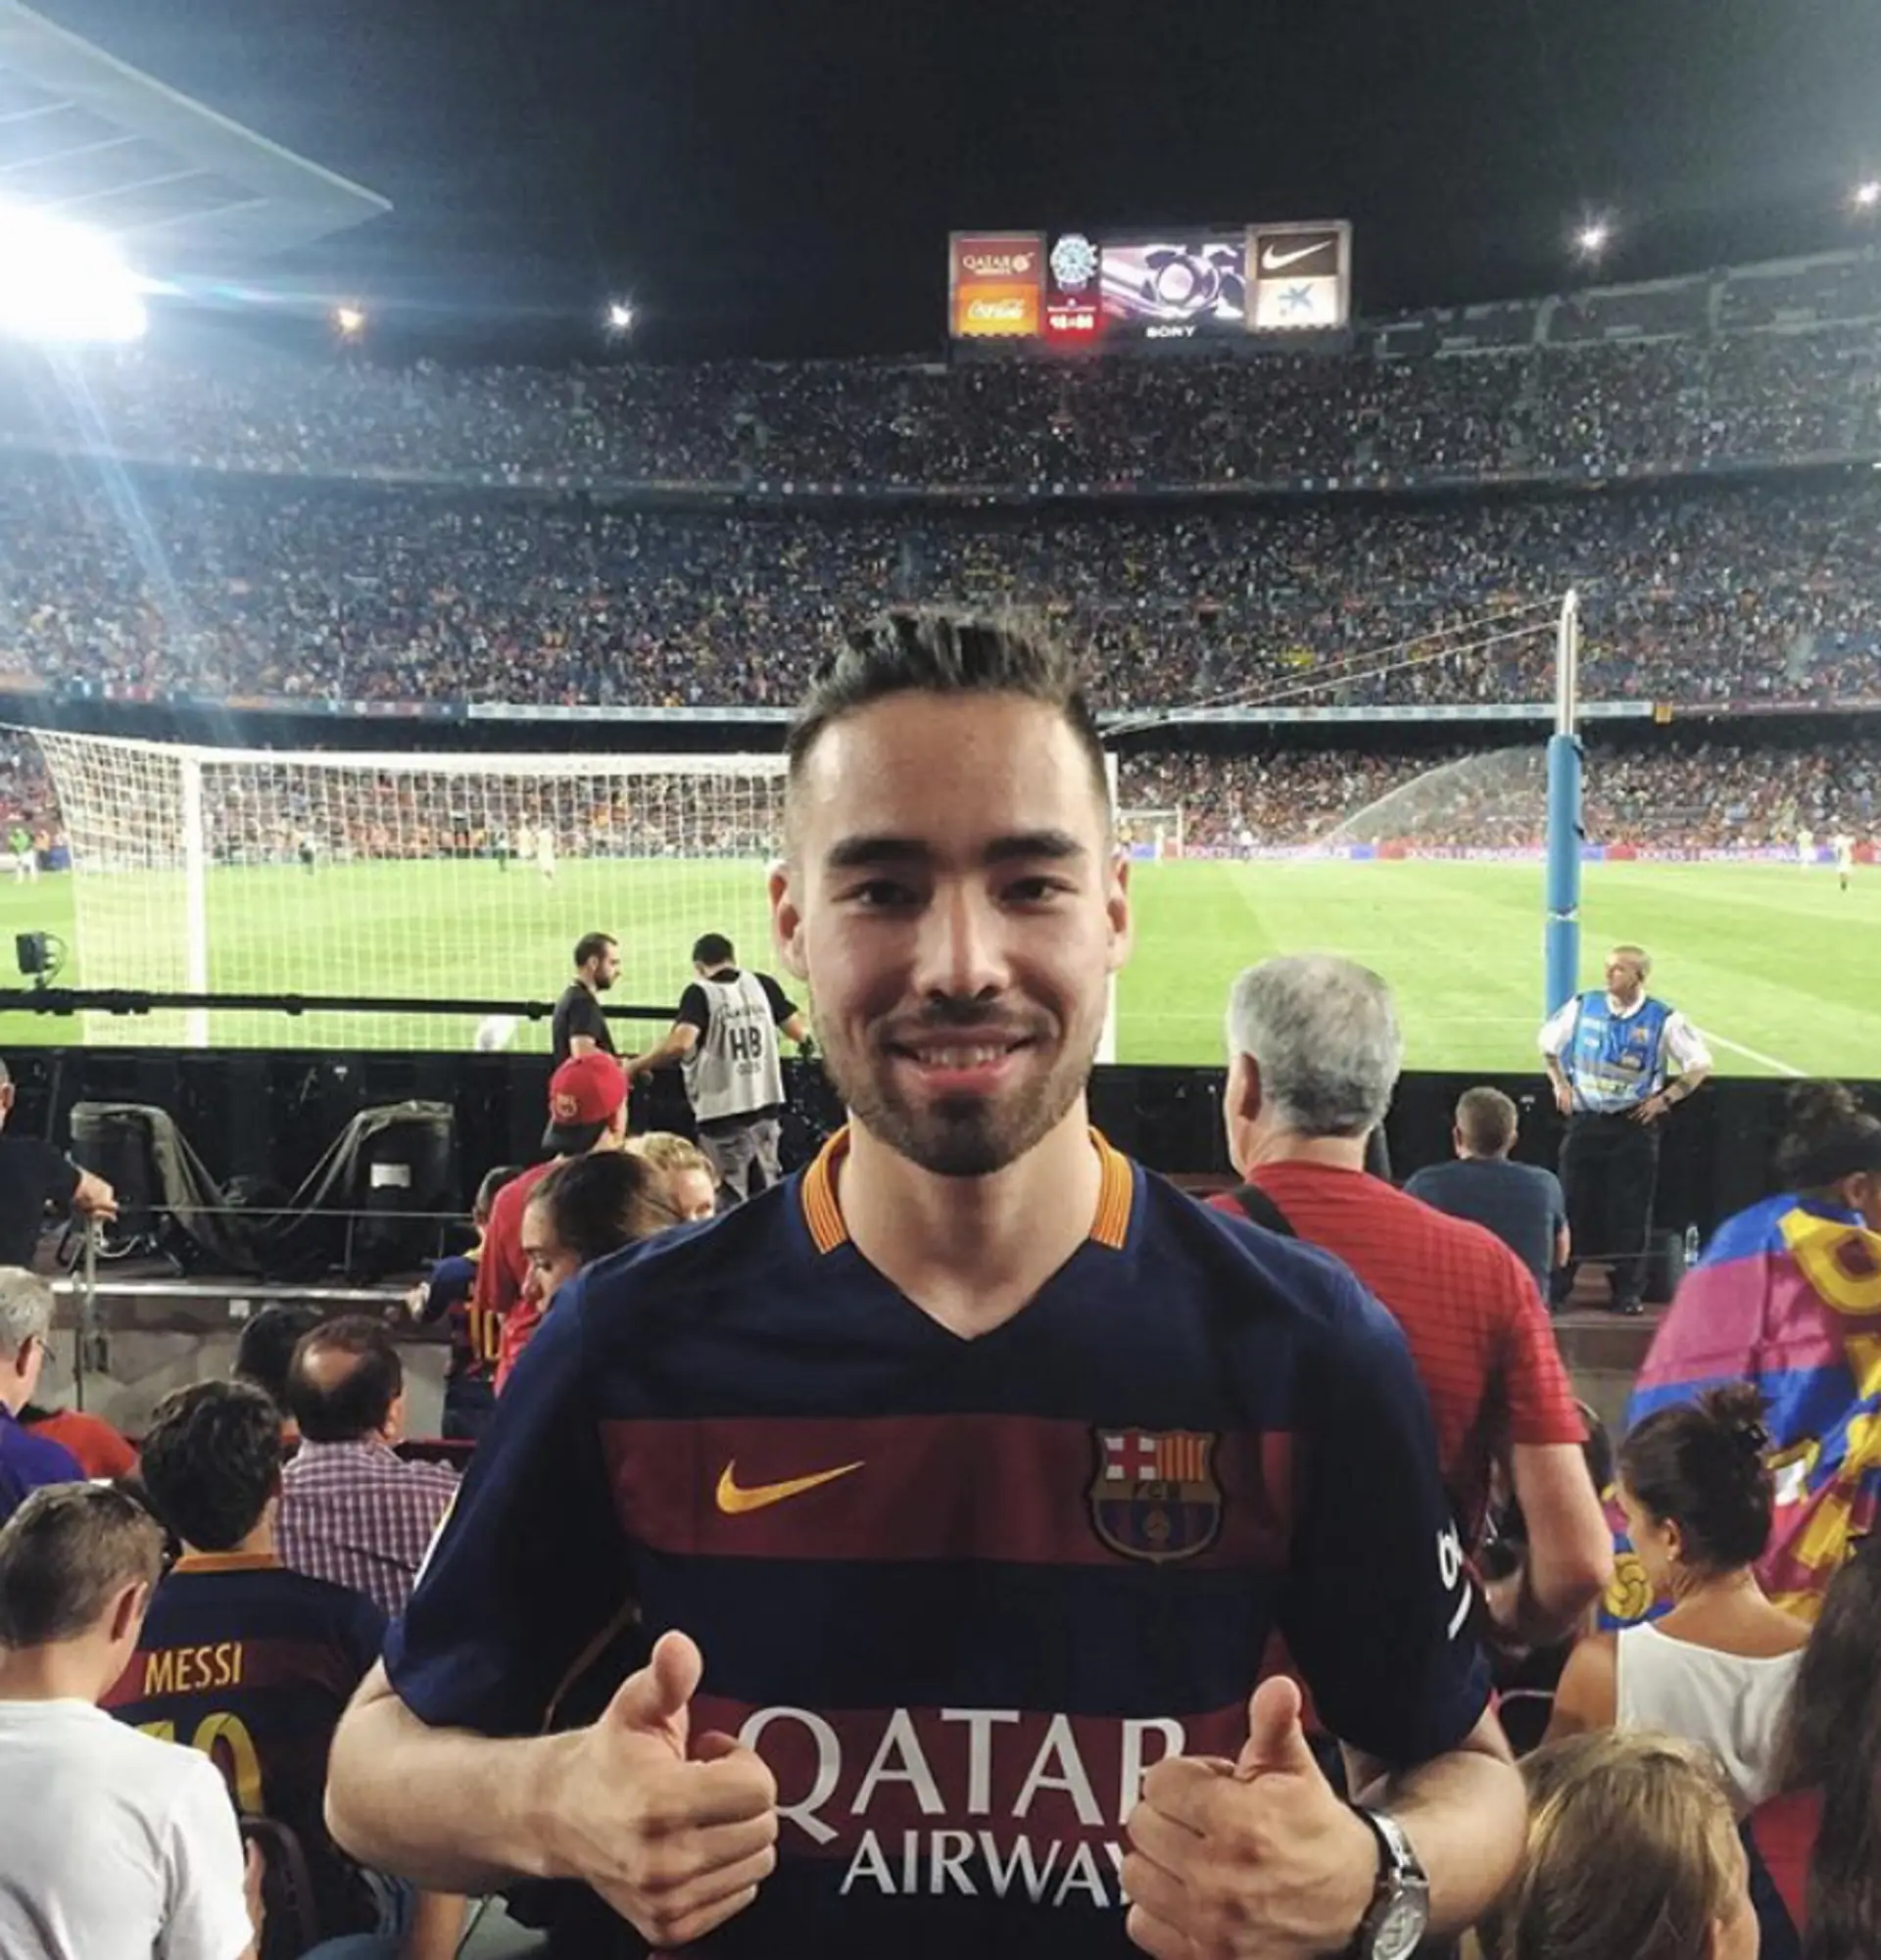 TBT to my Camp Nou trip back in 2015